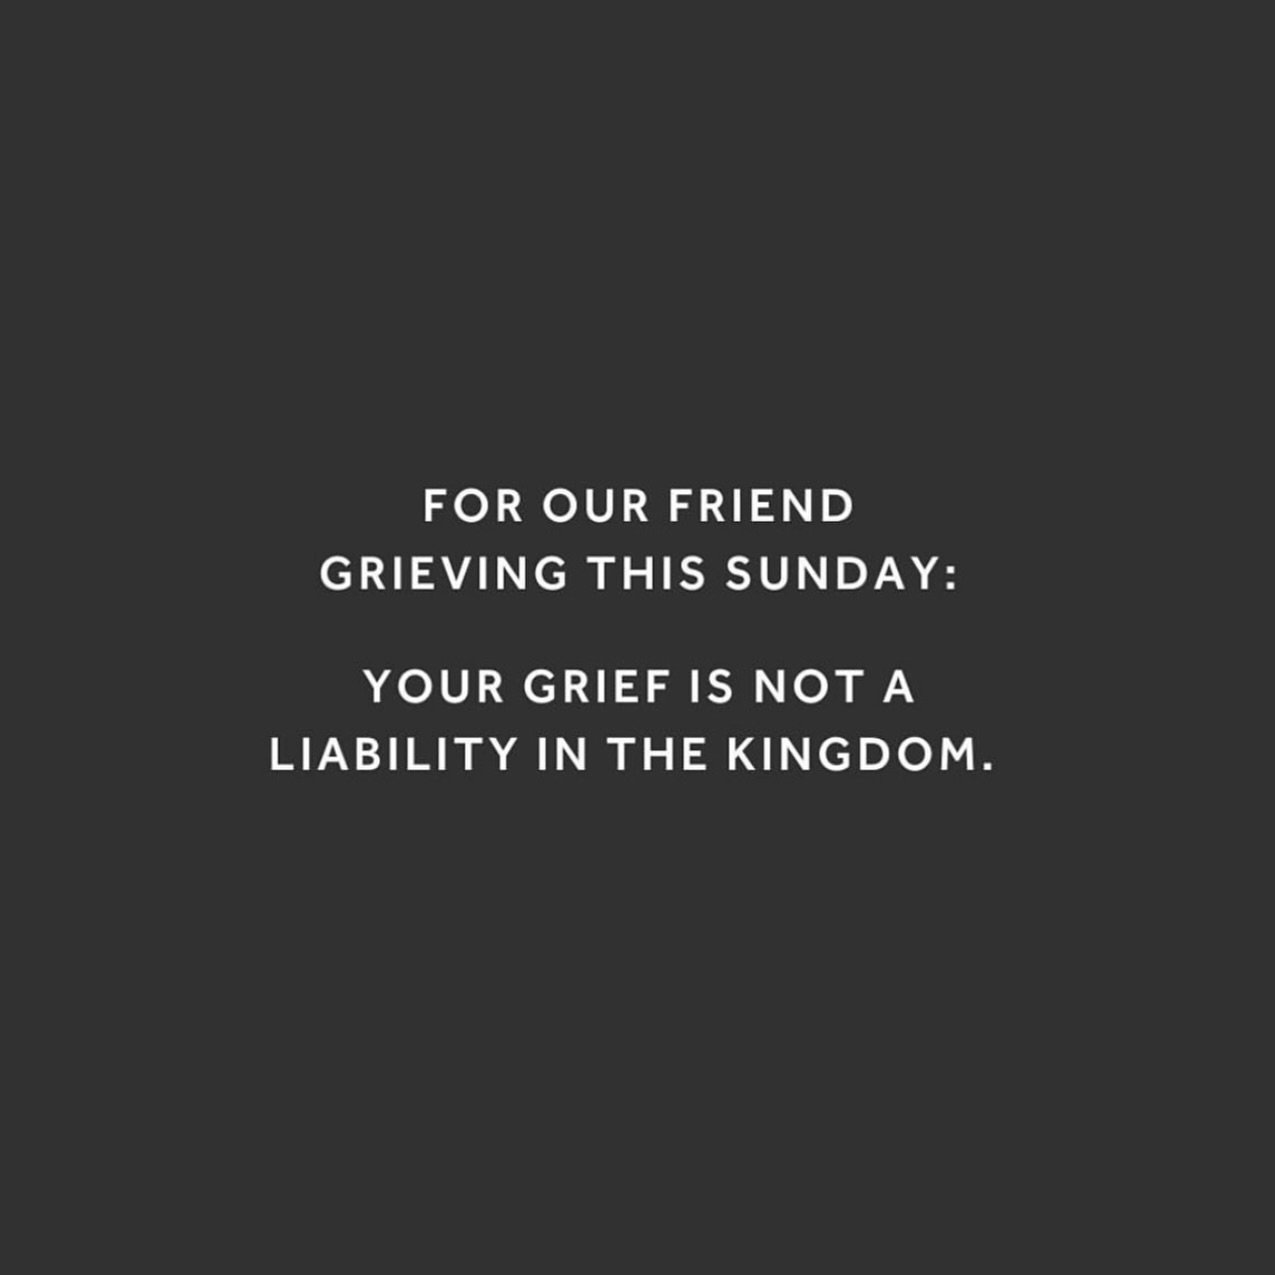 Your grief is not a liability in the kingdom. Your sadness is a not a distraction to God, not a season He wishes you would skip over. You are a daughter and you get to bring your hurt, pain, bitterness, and broken dreams to your good Father in the th